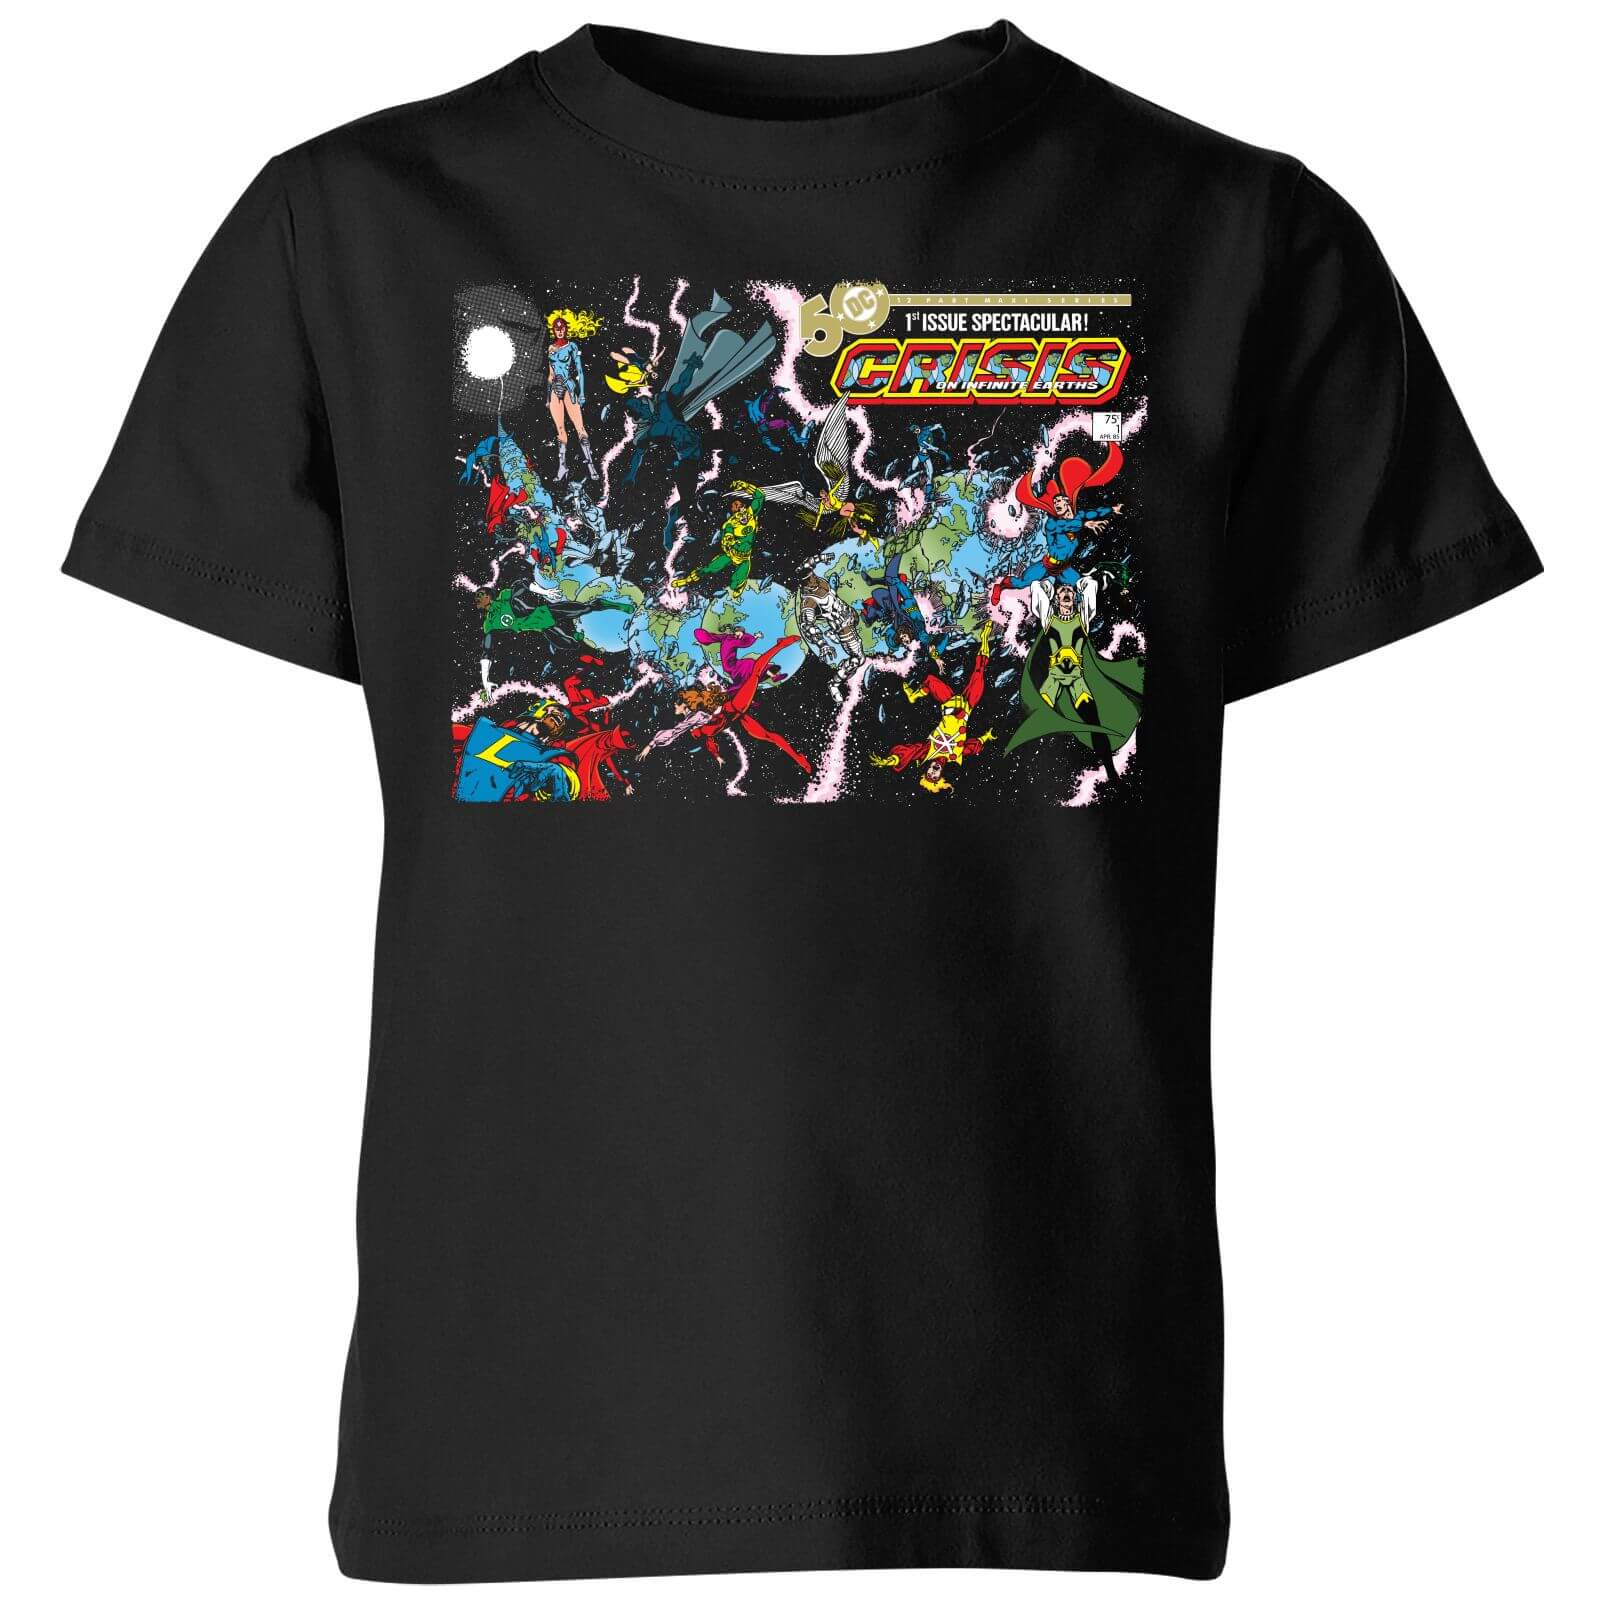 Justice League Crisis On Infinite Earths Cover Kids' T-Shirt - Black - 9-10 Years - Black